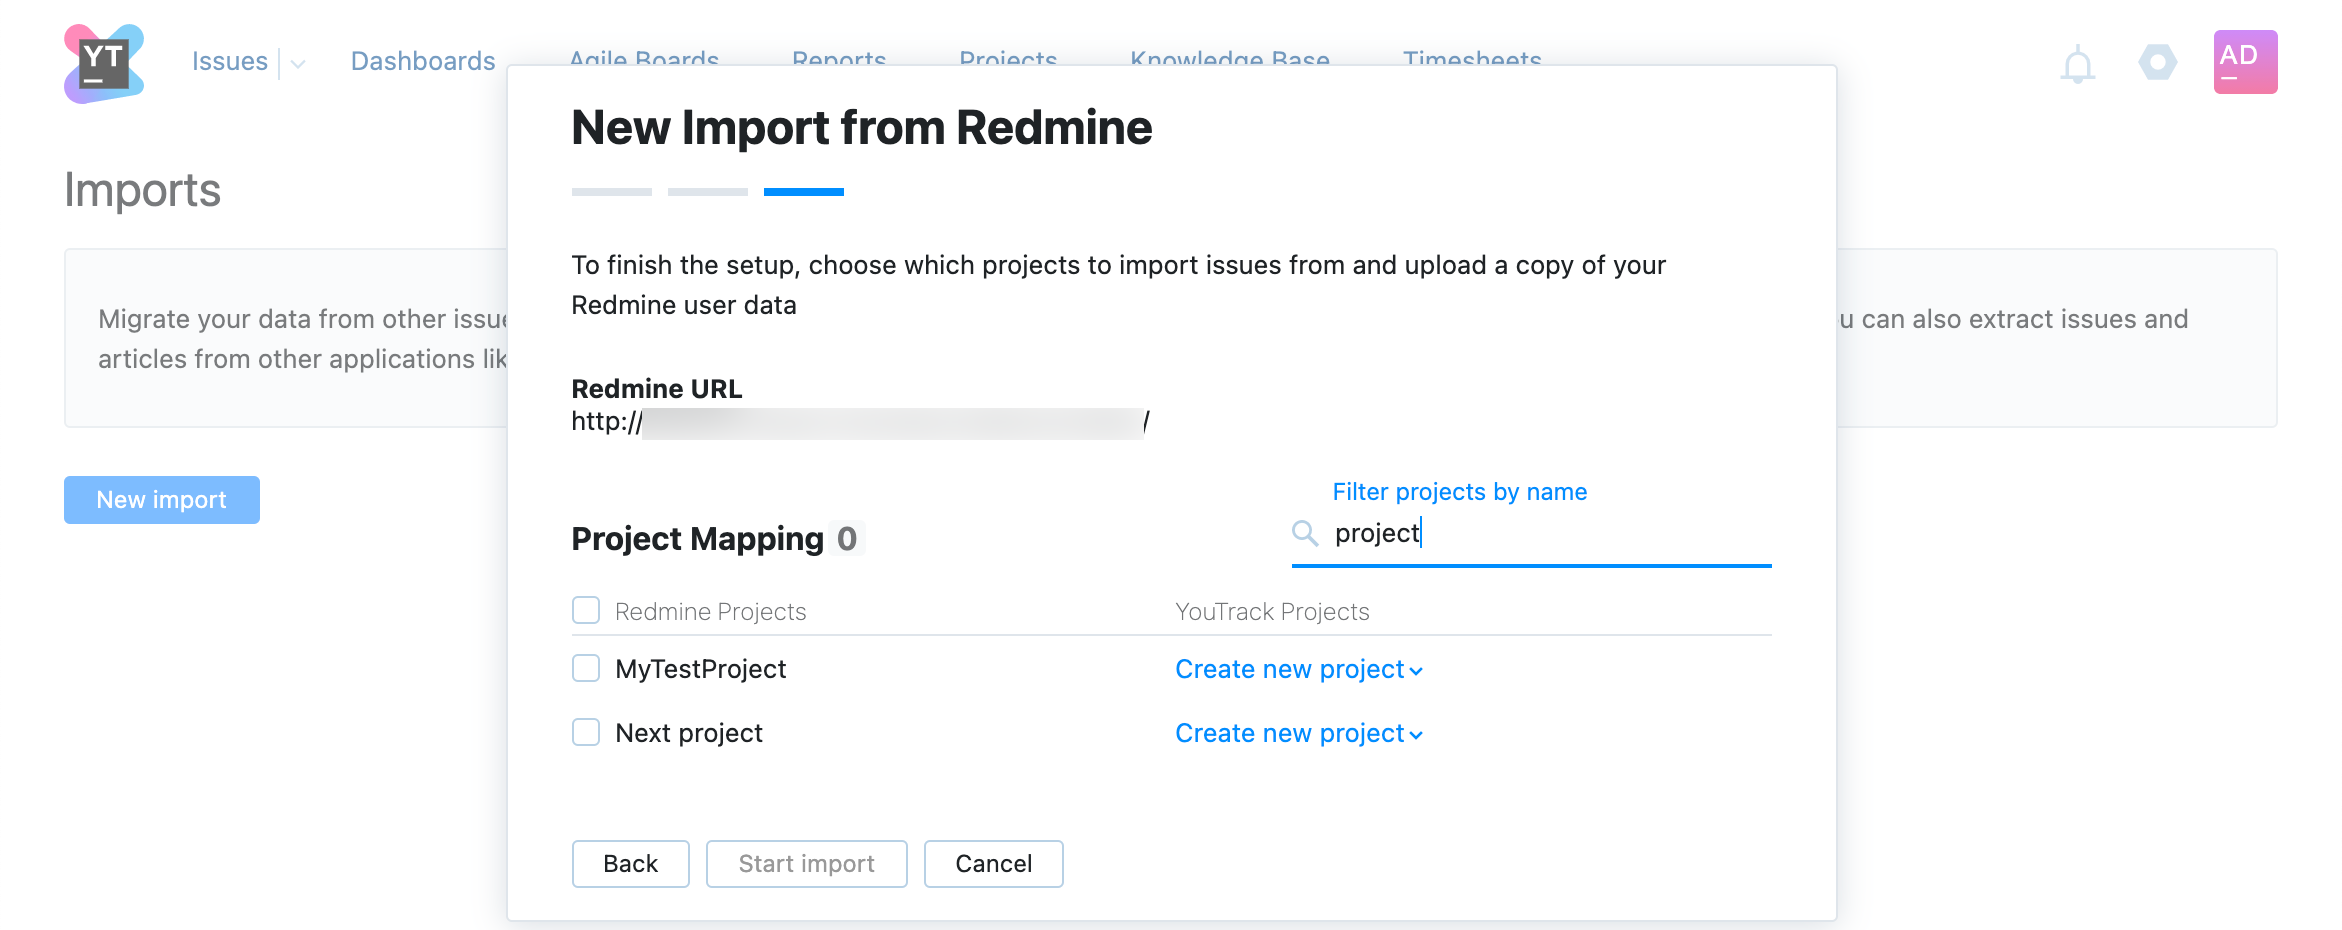 New Import from Redmine dialog step two.